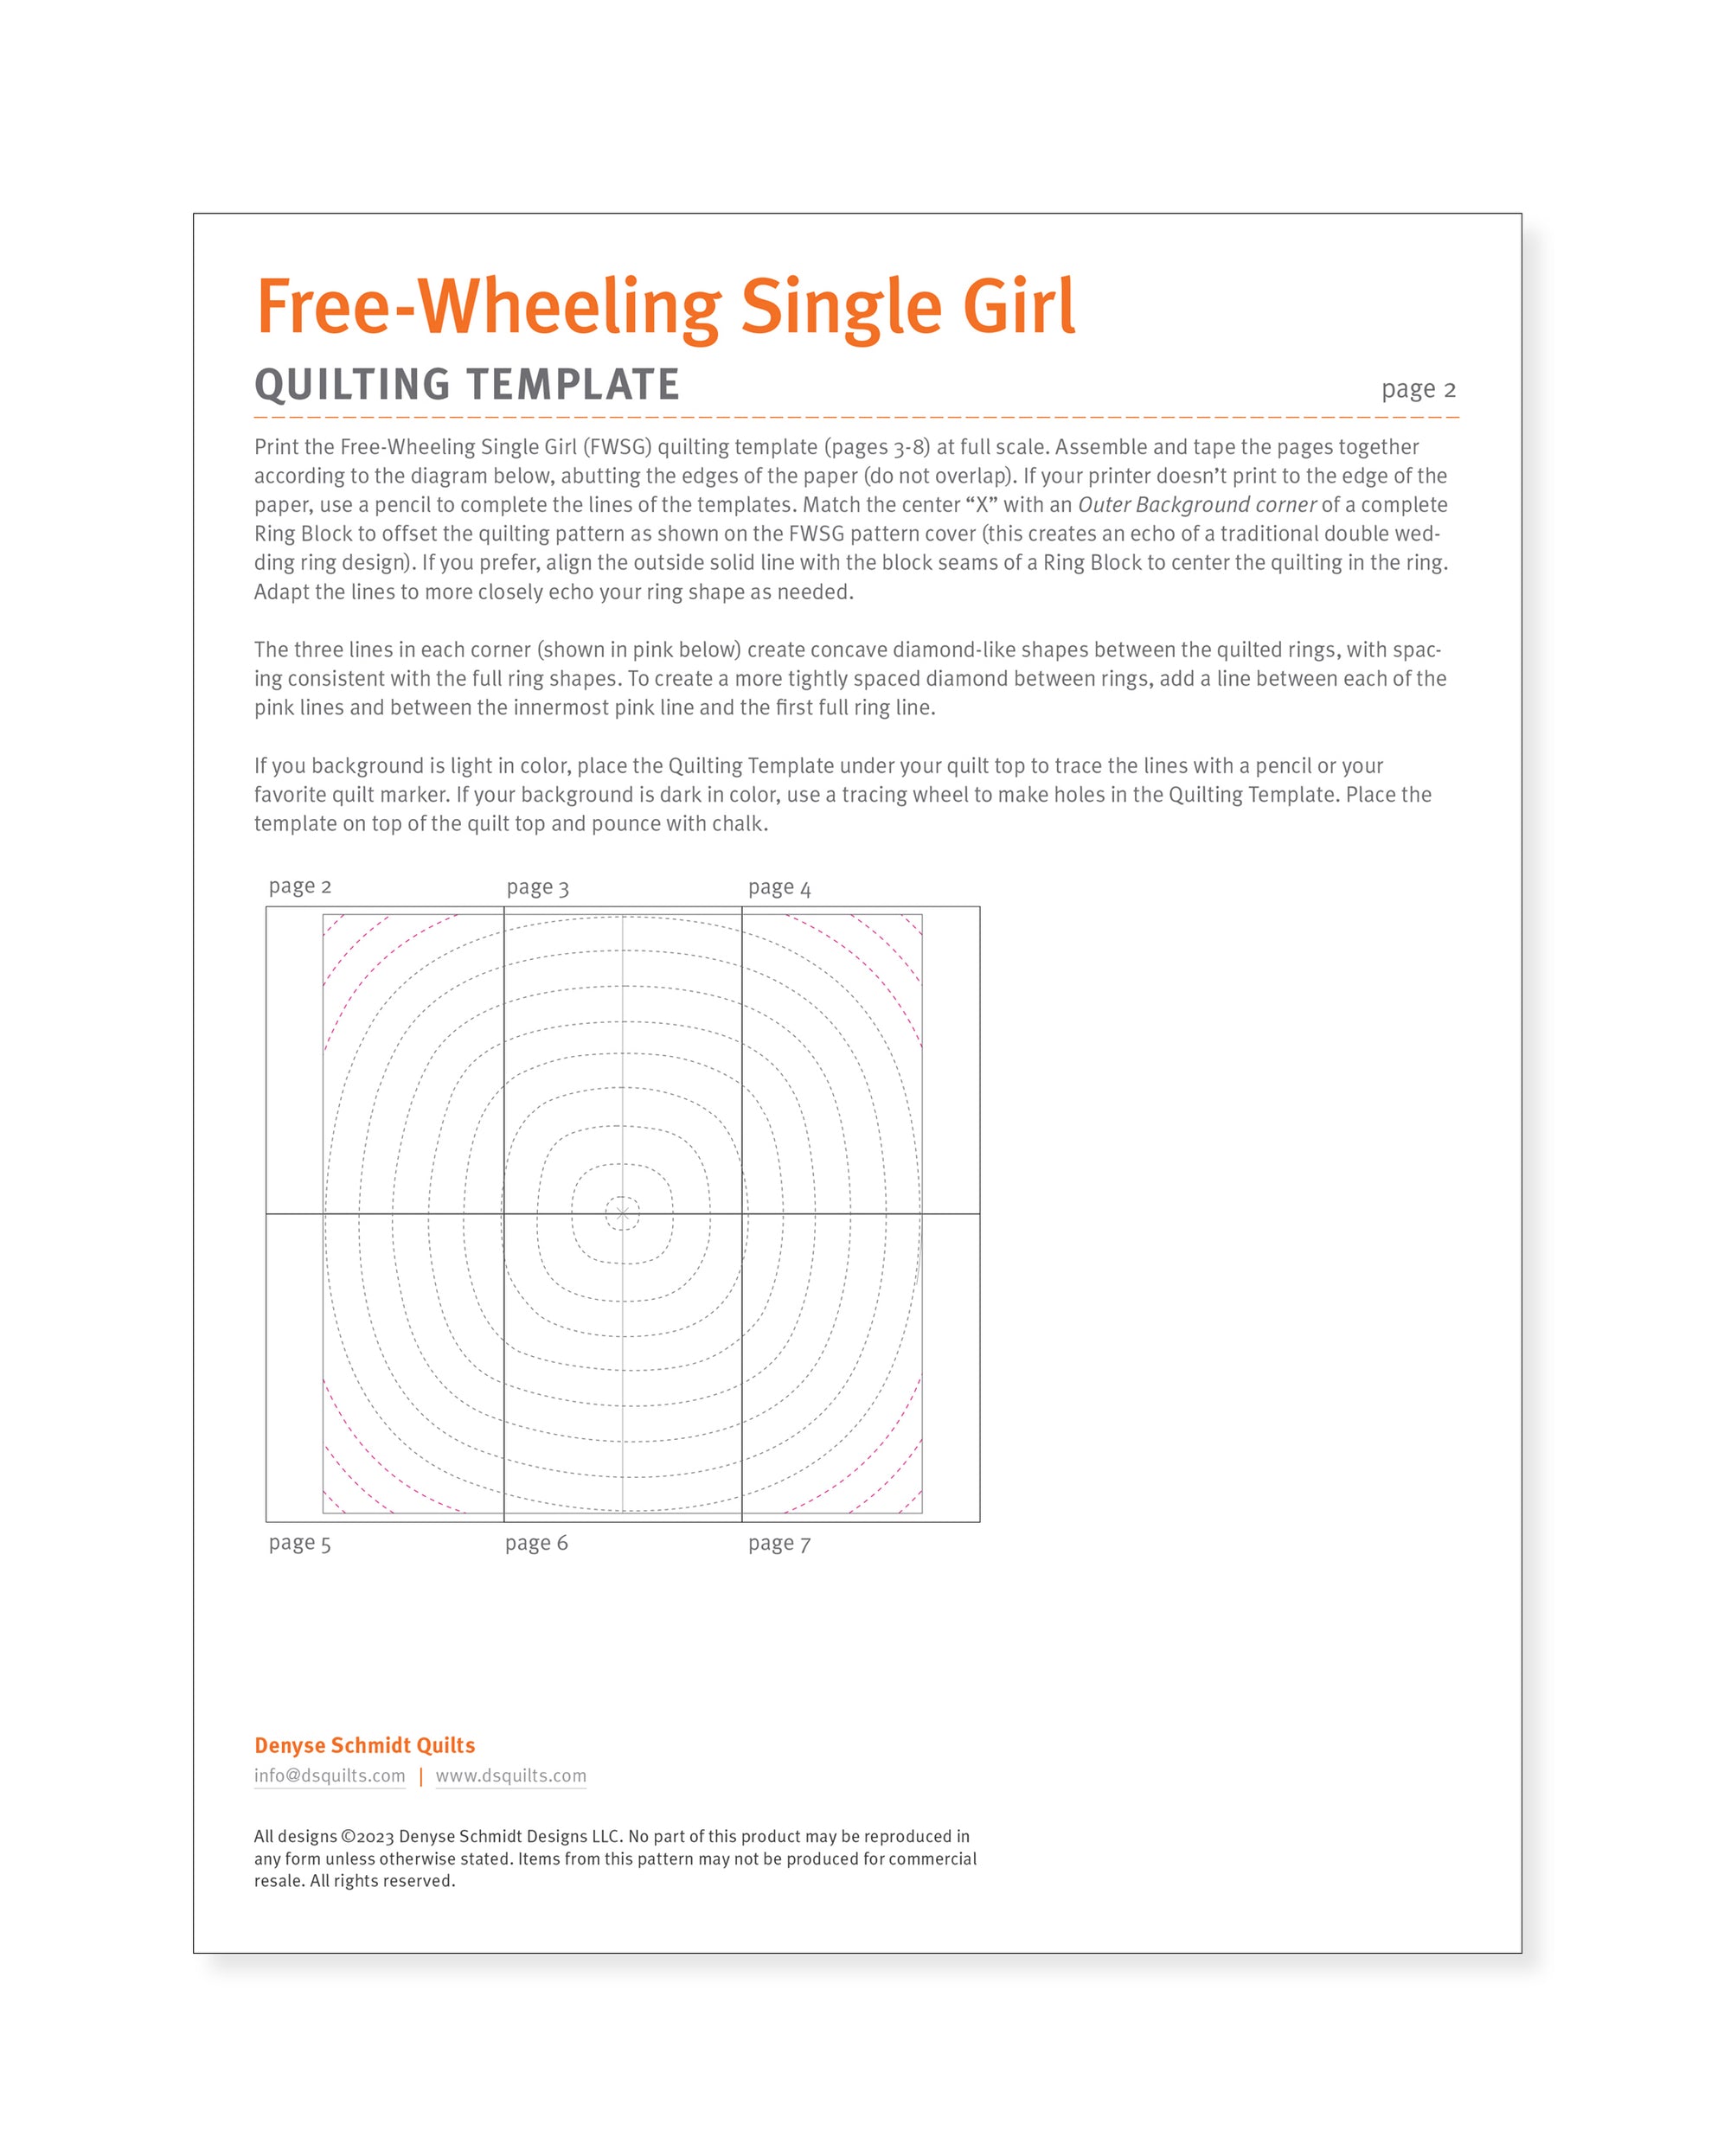 Free-Wheeling Single Girl quilting template